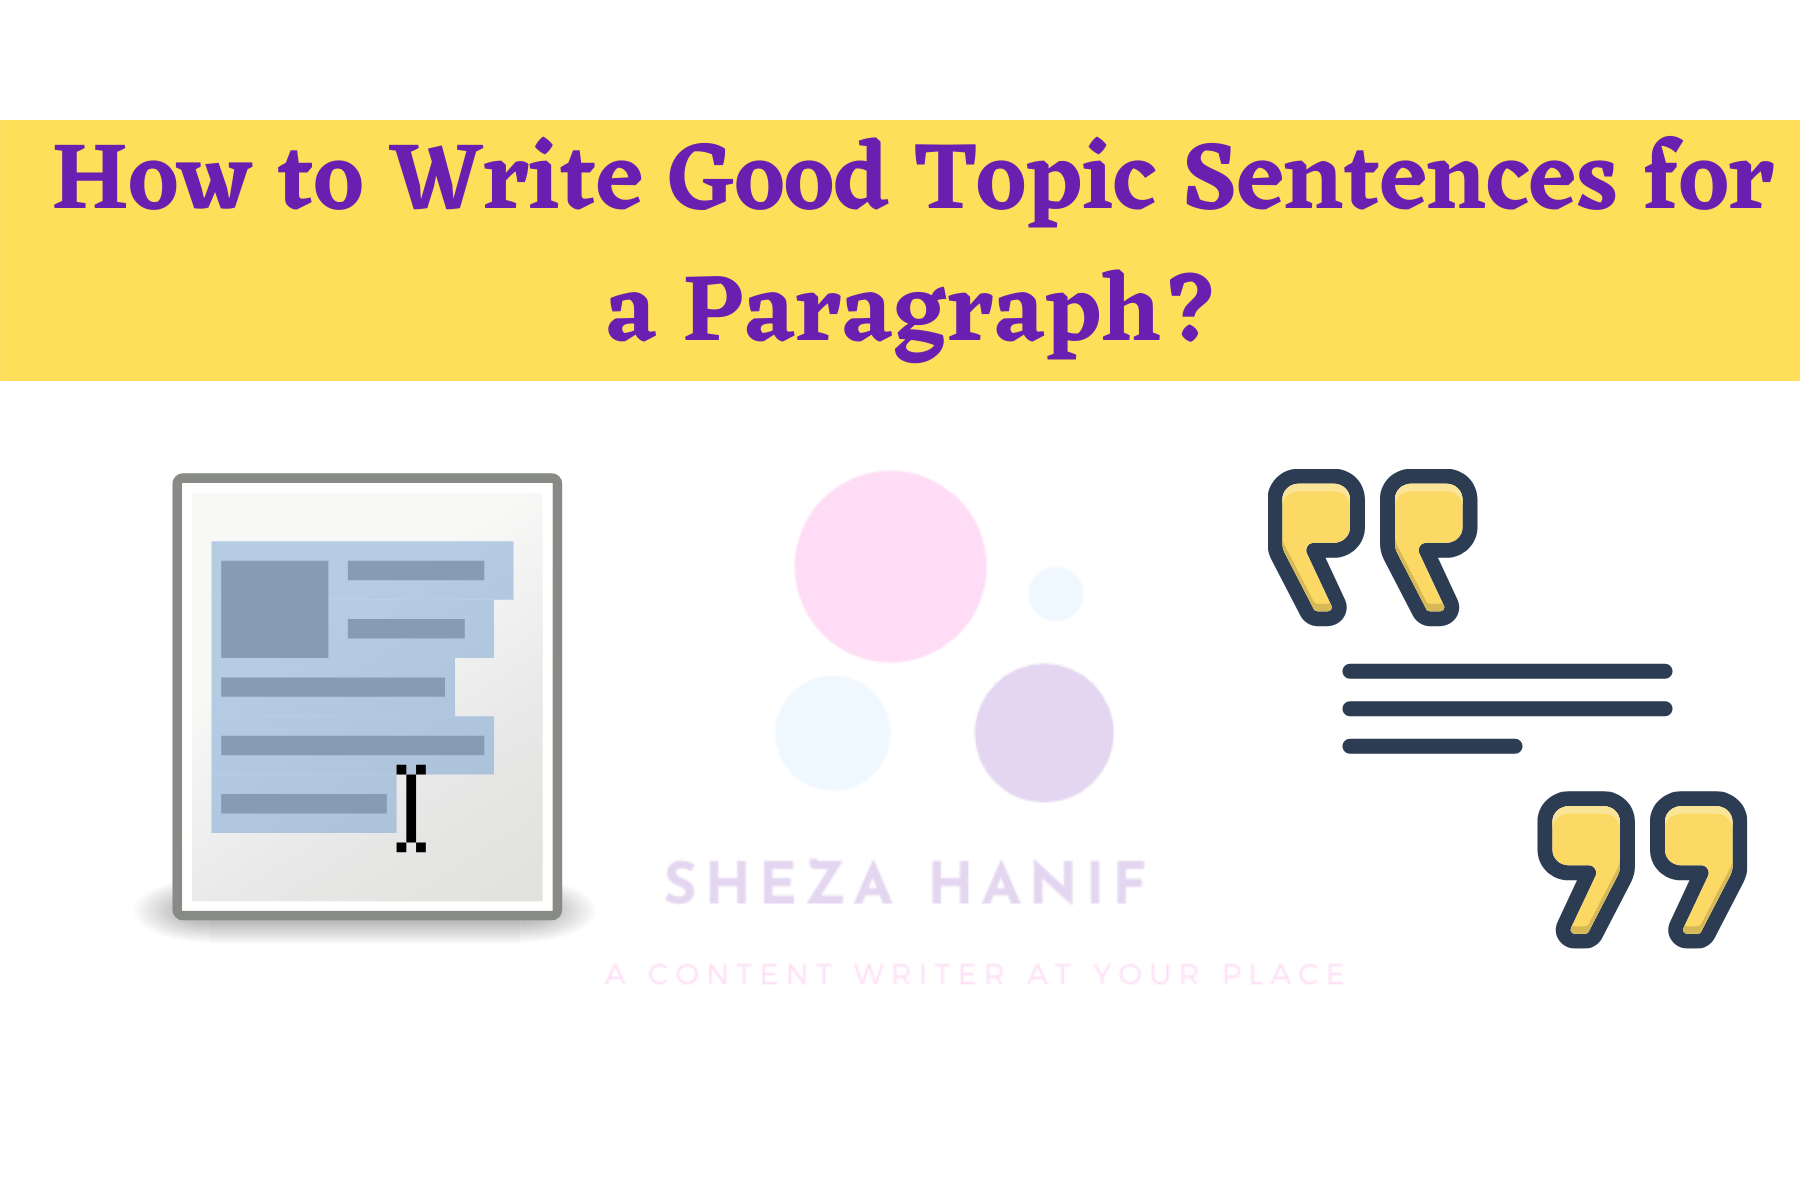 How to Write Good Topic Sentences for a Paragraph?